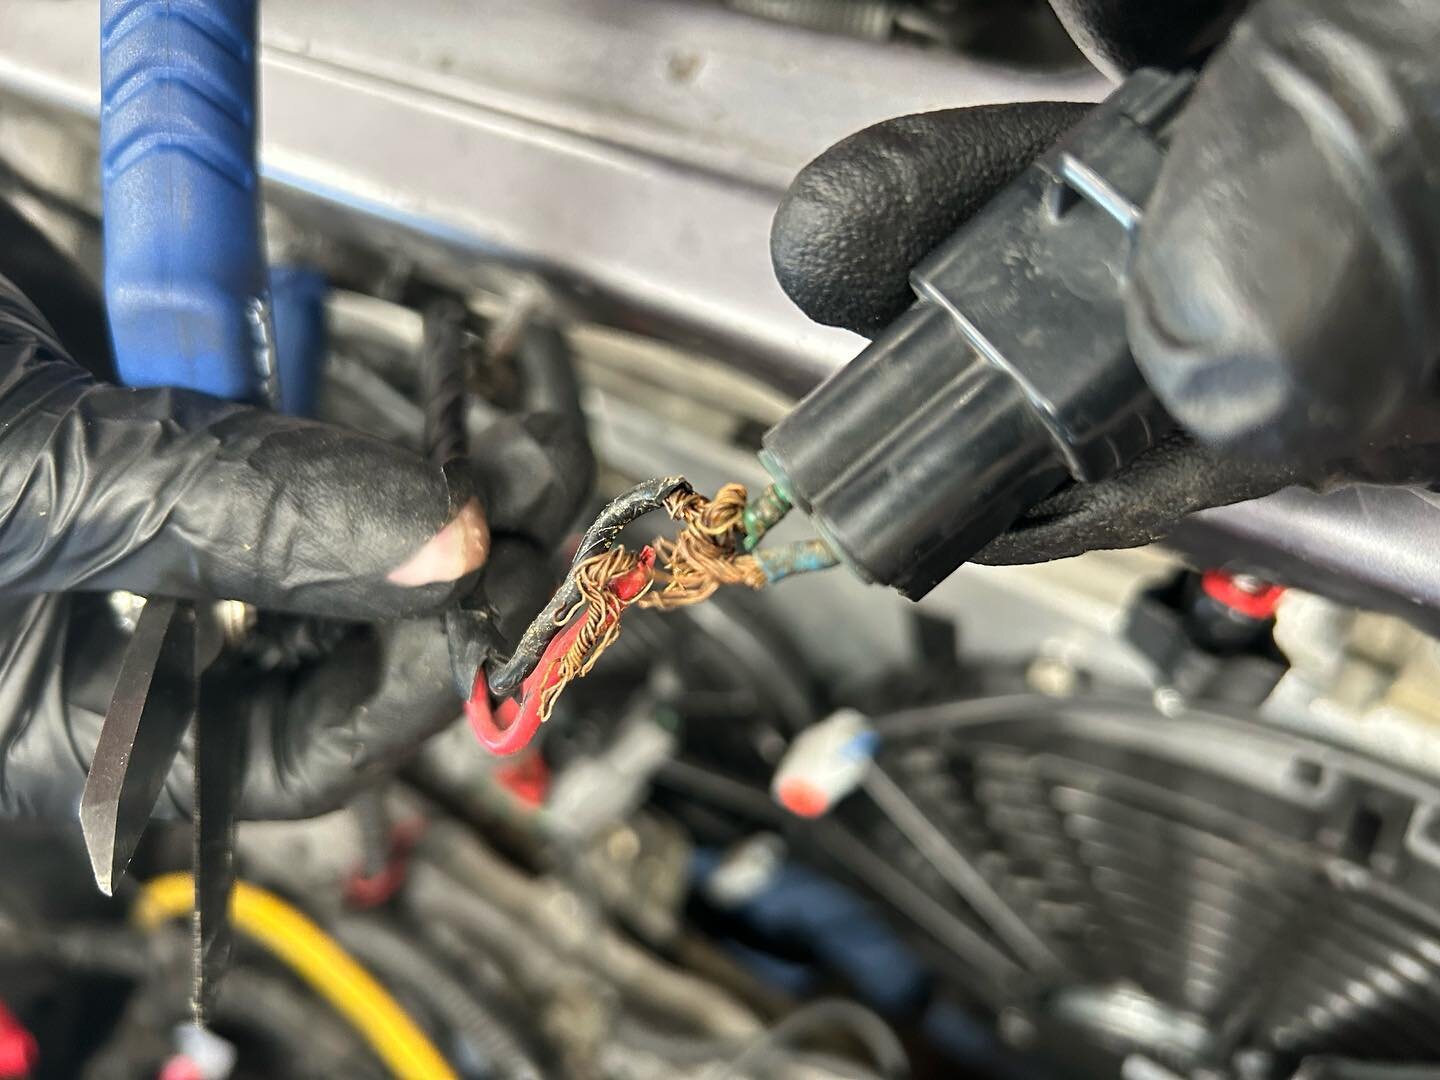 This plus a bunch of electrical tape is all we found holding this fan circuit together on this #mazda #rx8. Good thing we were doing rewiring work to install these new fans. #arhindrichsllc #houston #texas #cypresstexas #thatmiatashop #mazdarx8 #wiri